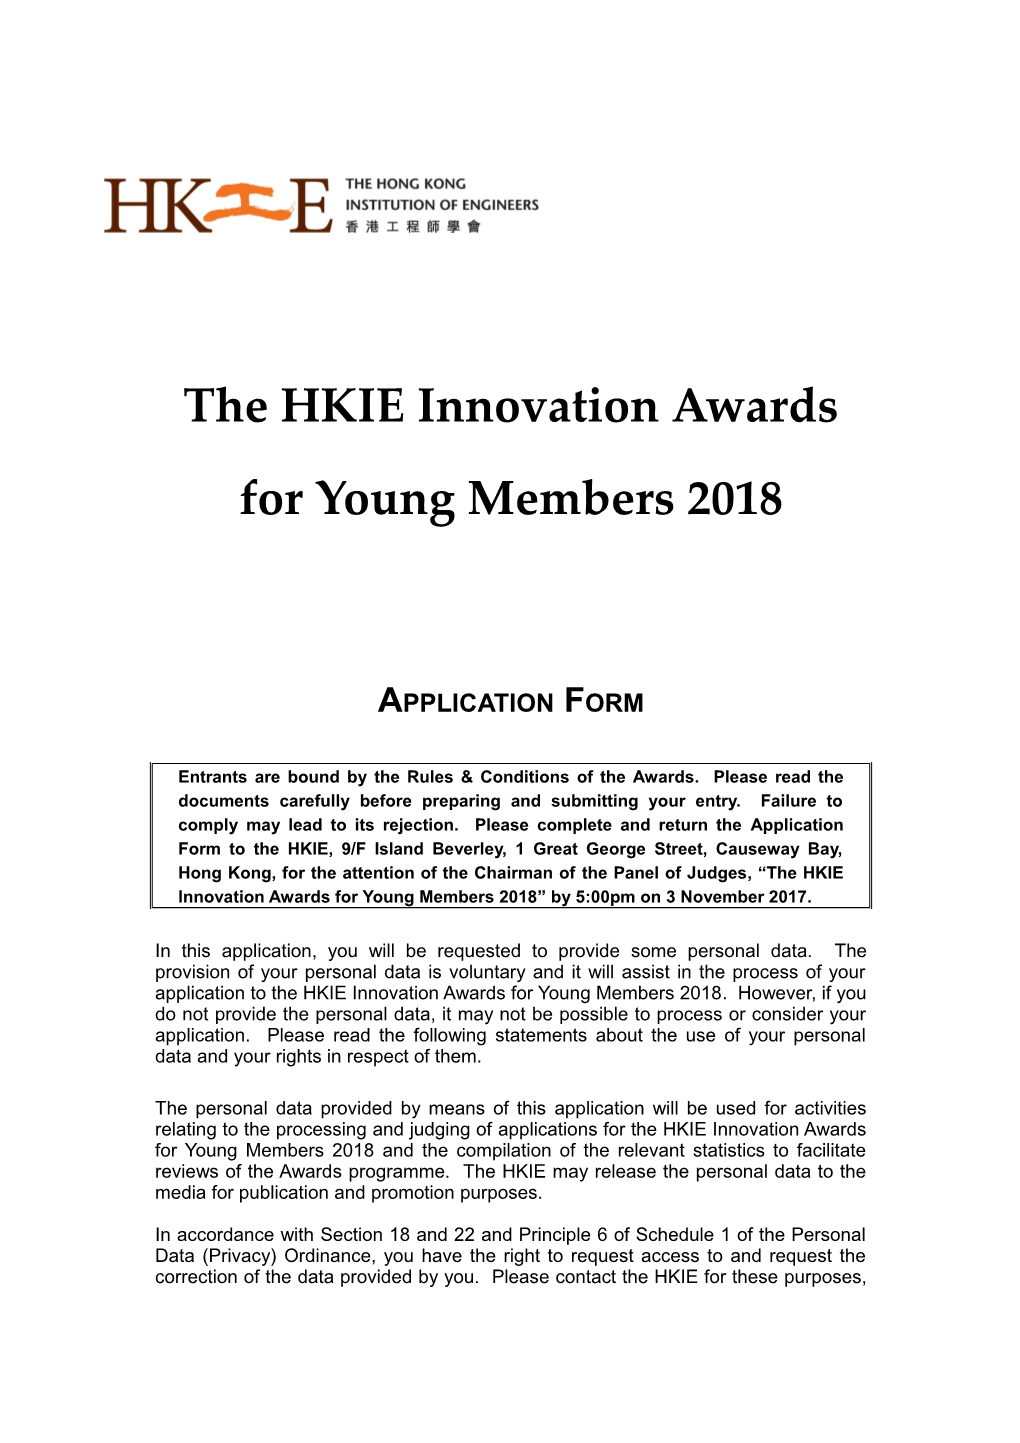 The HKIE Innovation Awards for Young Members 2018